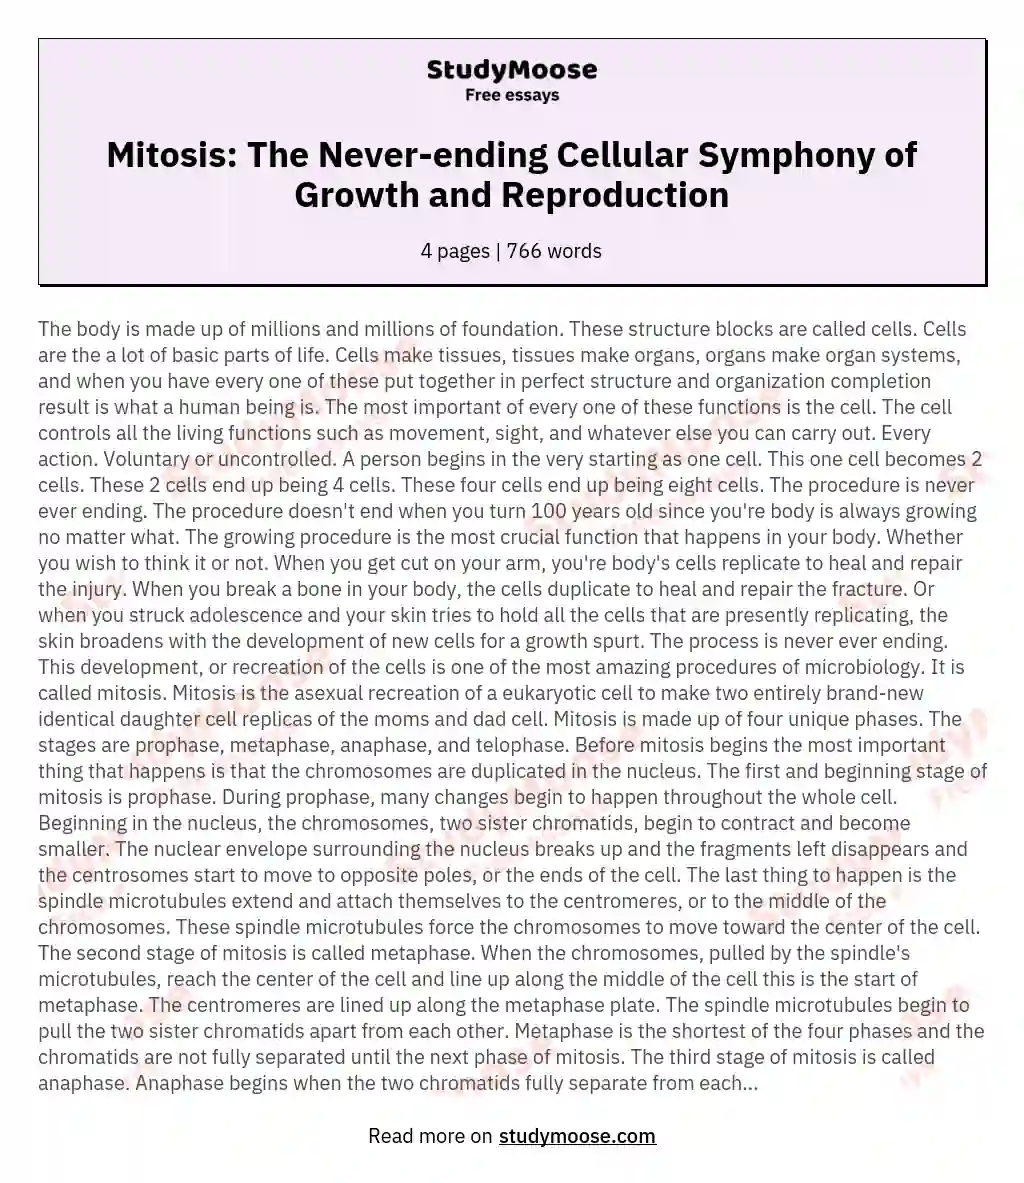 Mitosis: The Never-ending Cellular Symphony of Growth and Reproduction essay